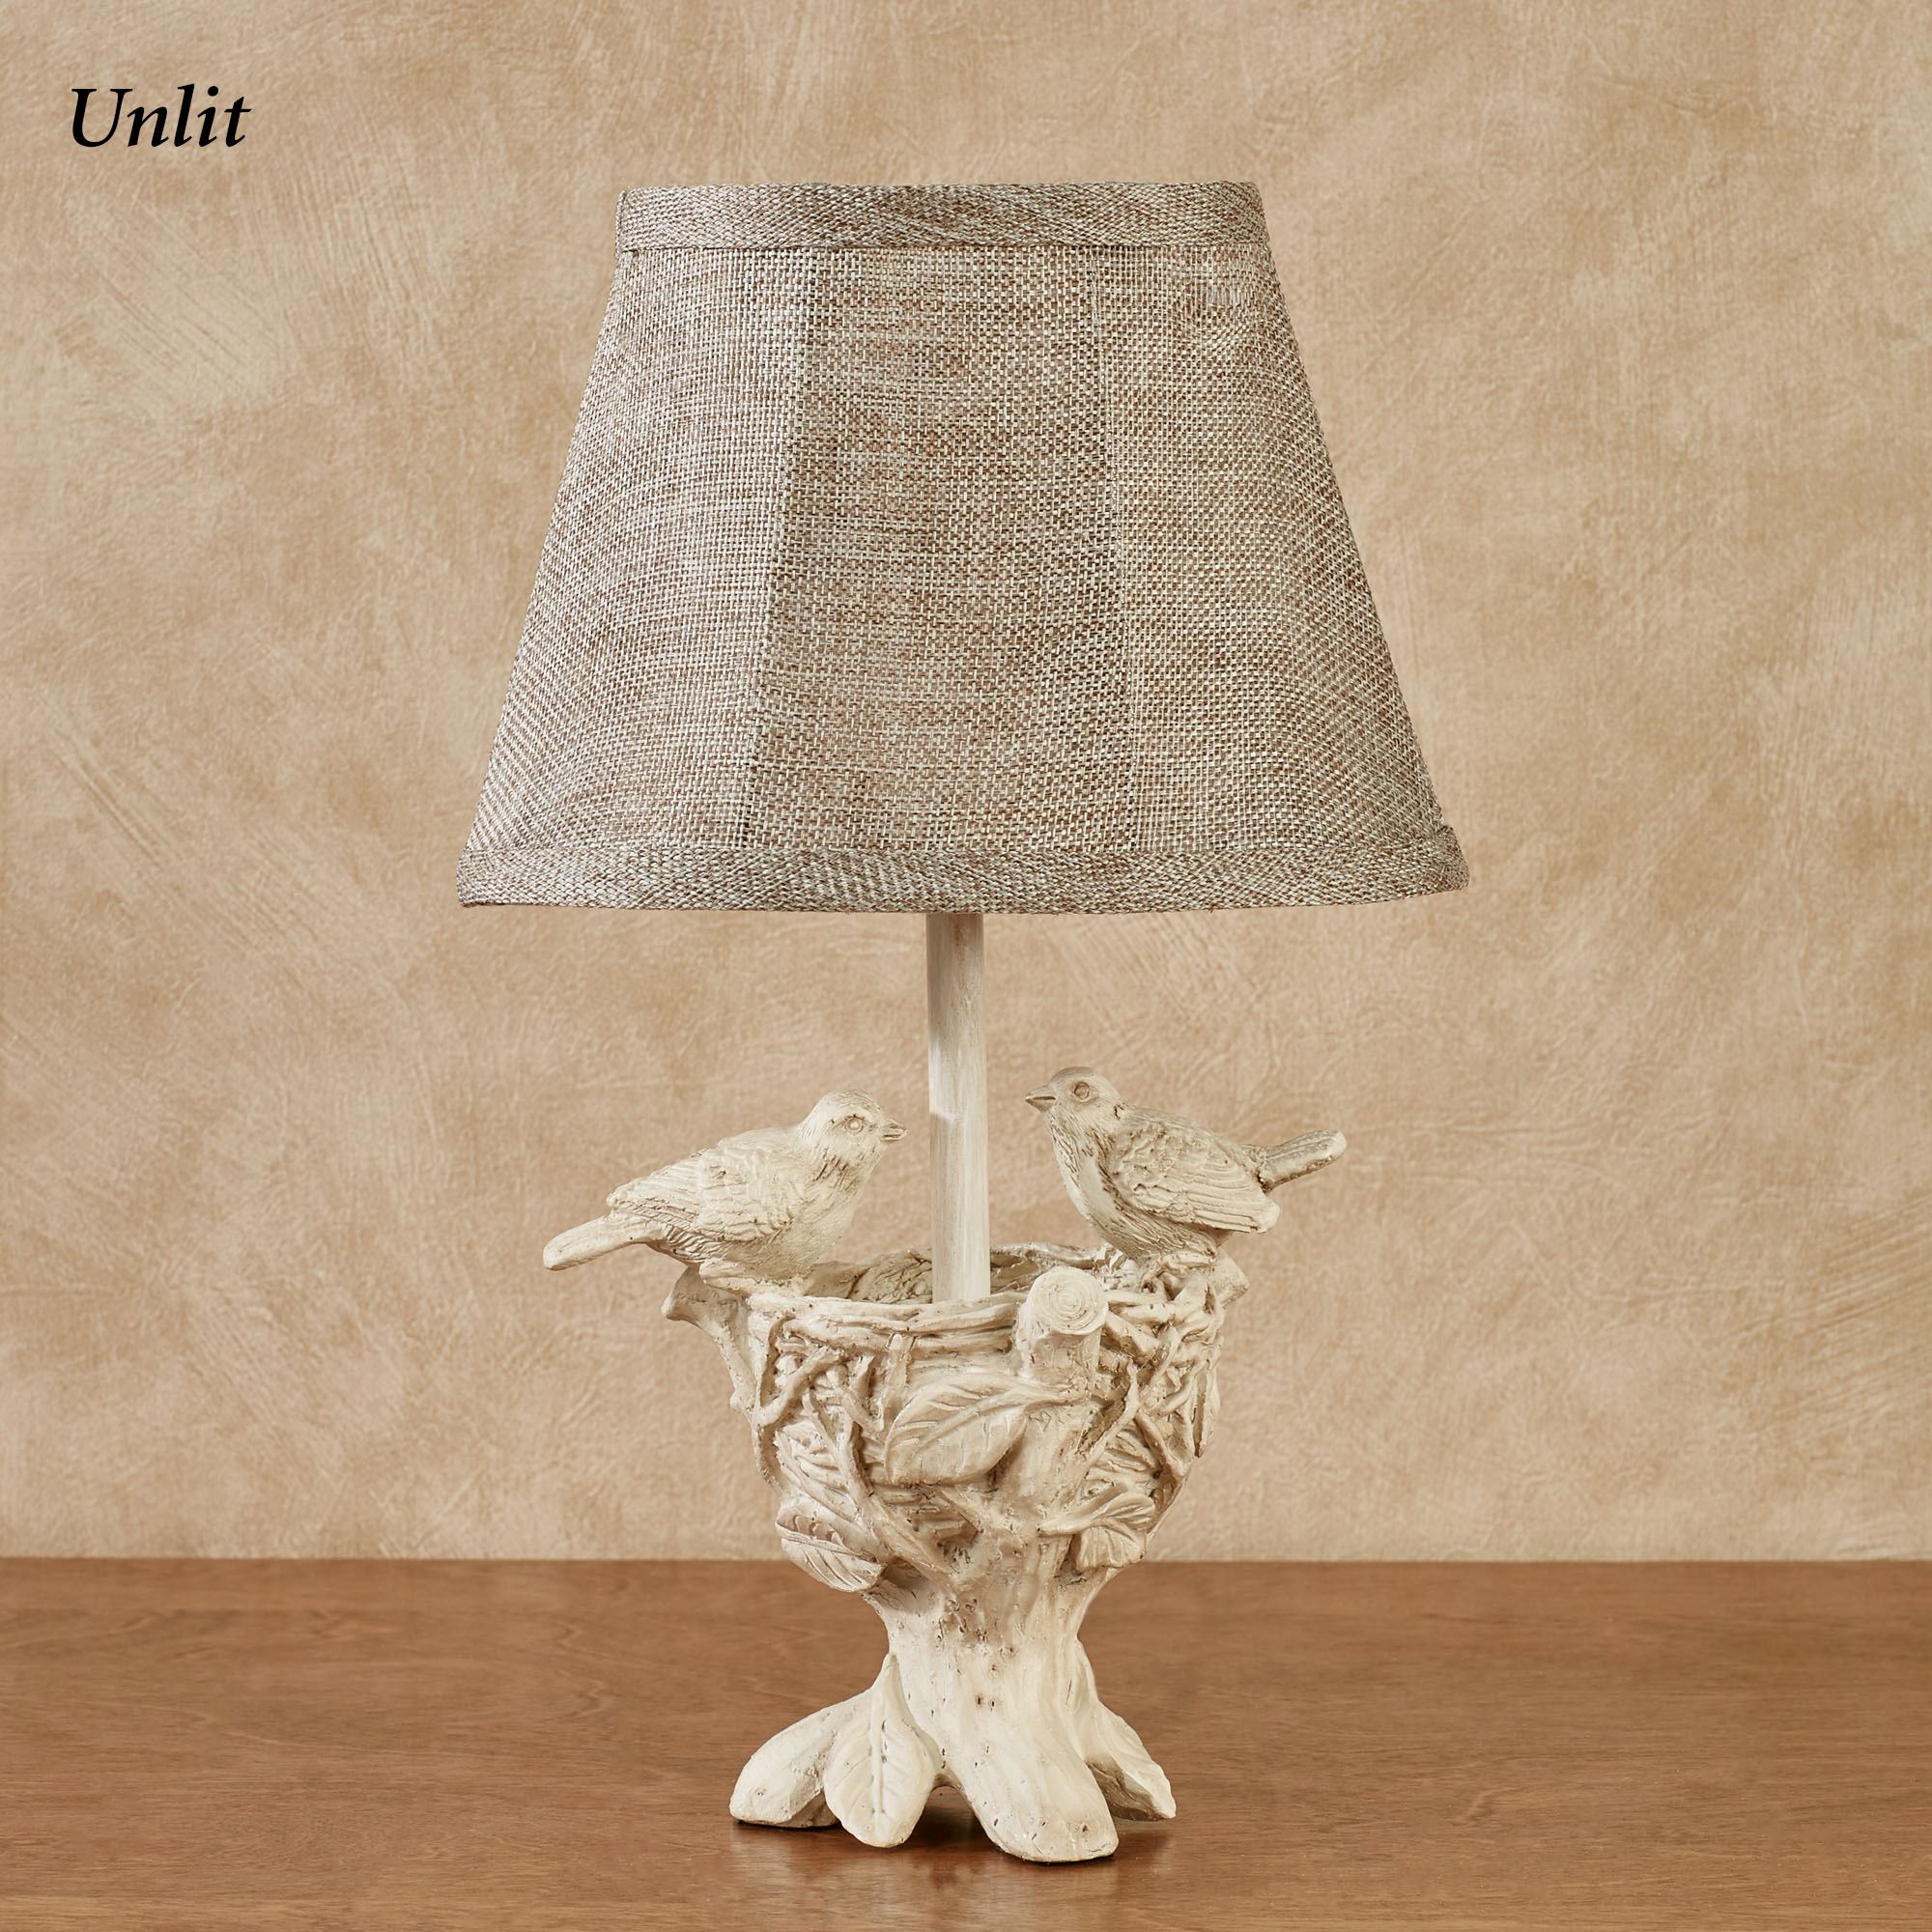 watching over the young bird nest small accent lamp pertaining decor table vintage marble top end tables modern and chairs outdoor pool furniture stool patio tray blanket box ikea